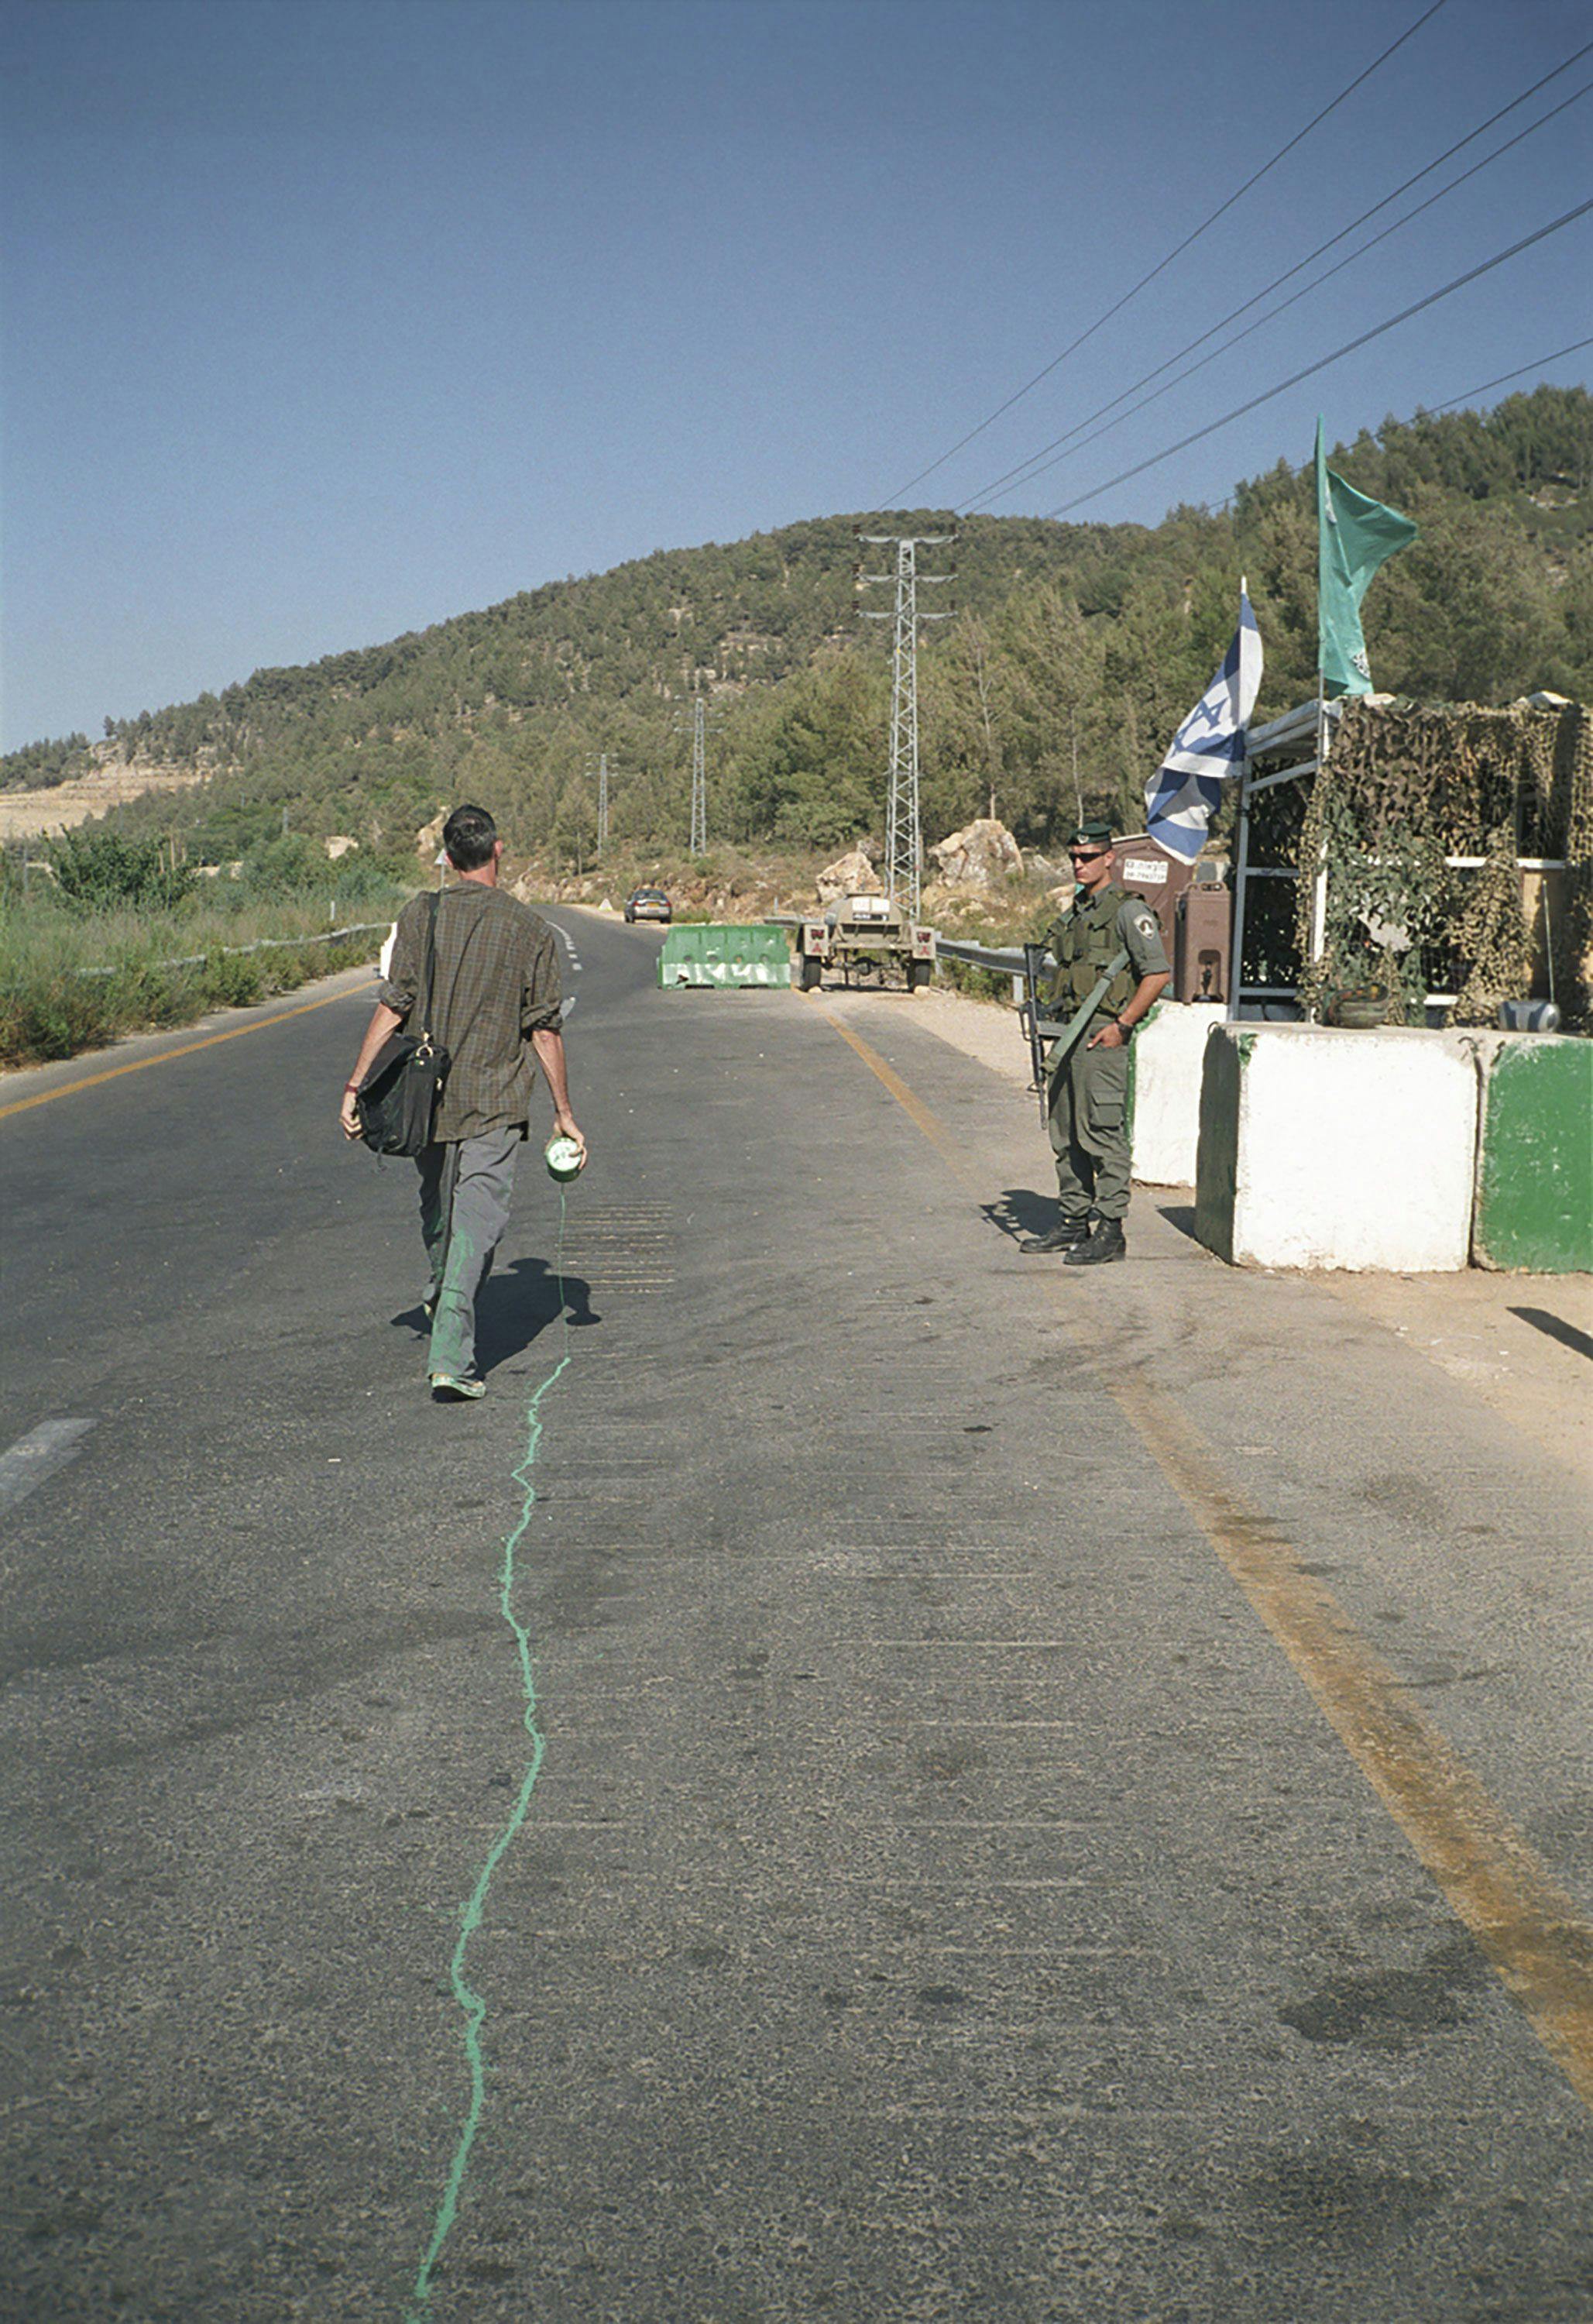 A video by Francis Alÿs, titled The Green Line (Sometimes doing something poetic can become political and sometimes doing something political can become poetic), dated 2004.